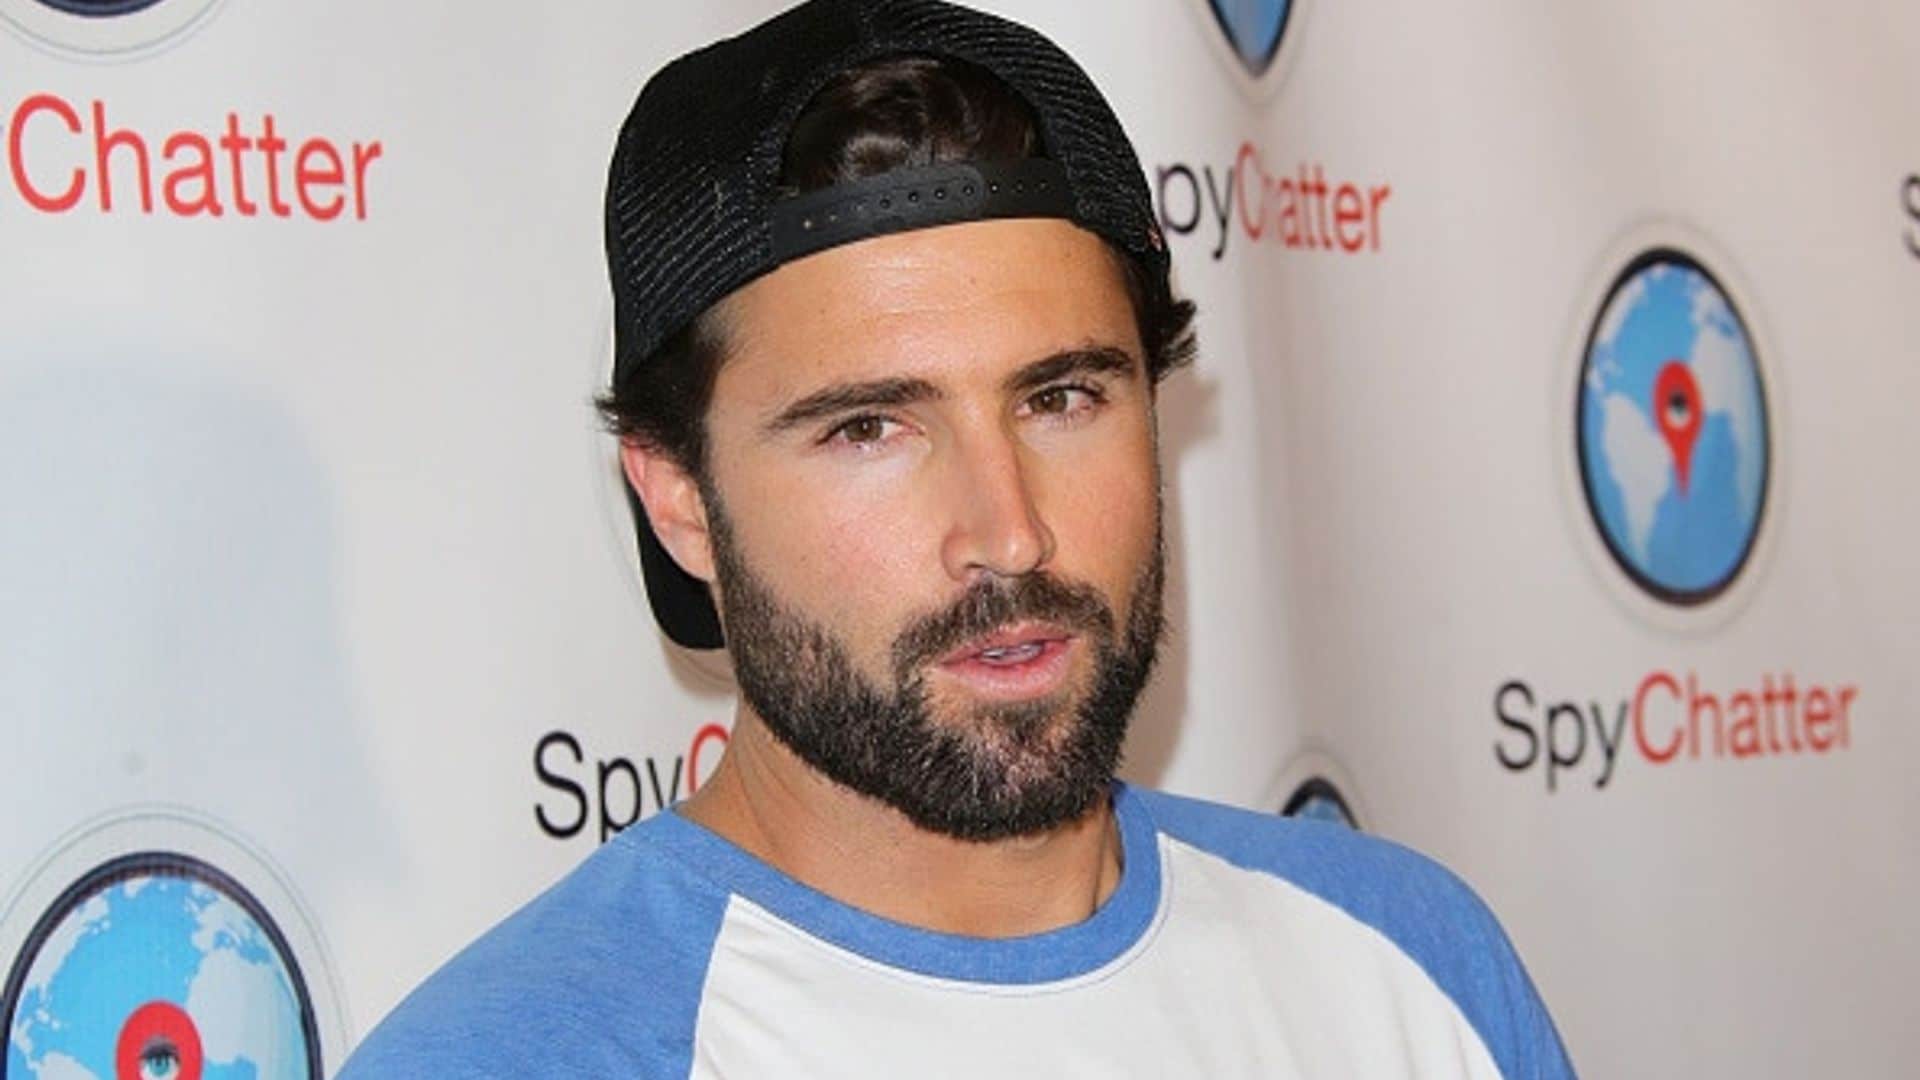 Brody Jenner's relationship with Caitlyn is better than with Bruce